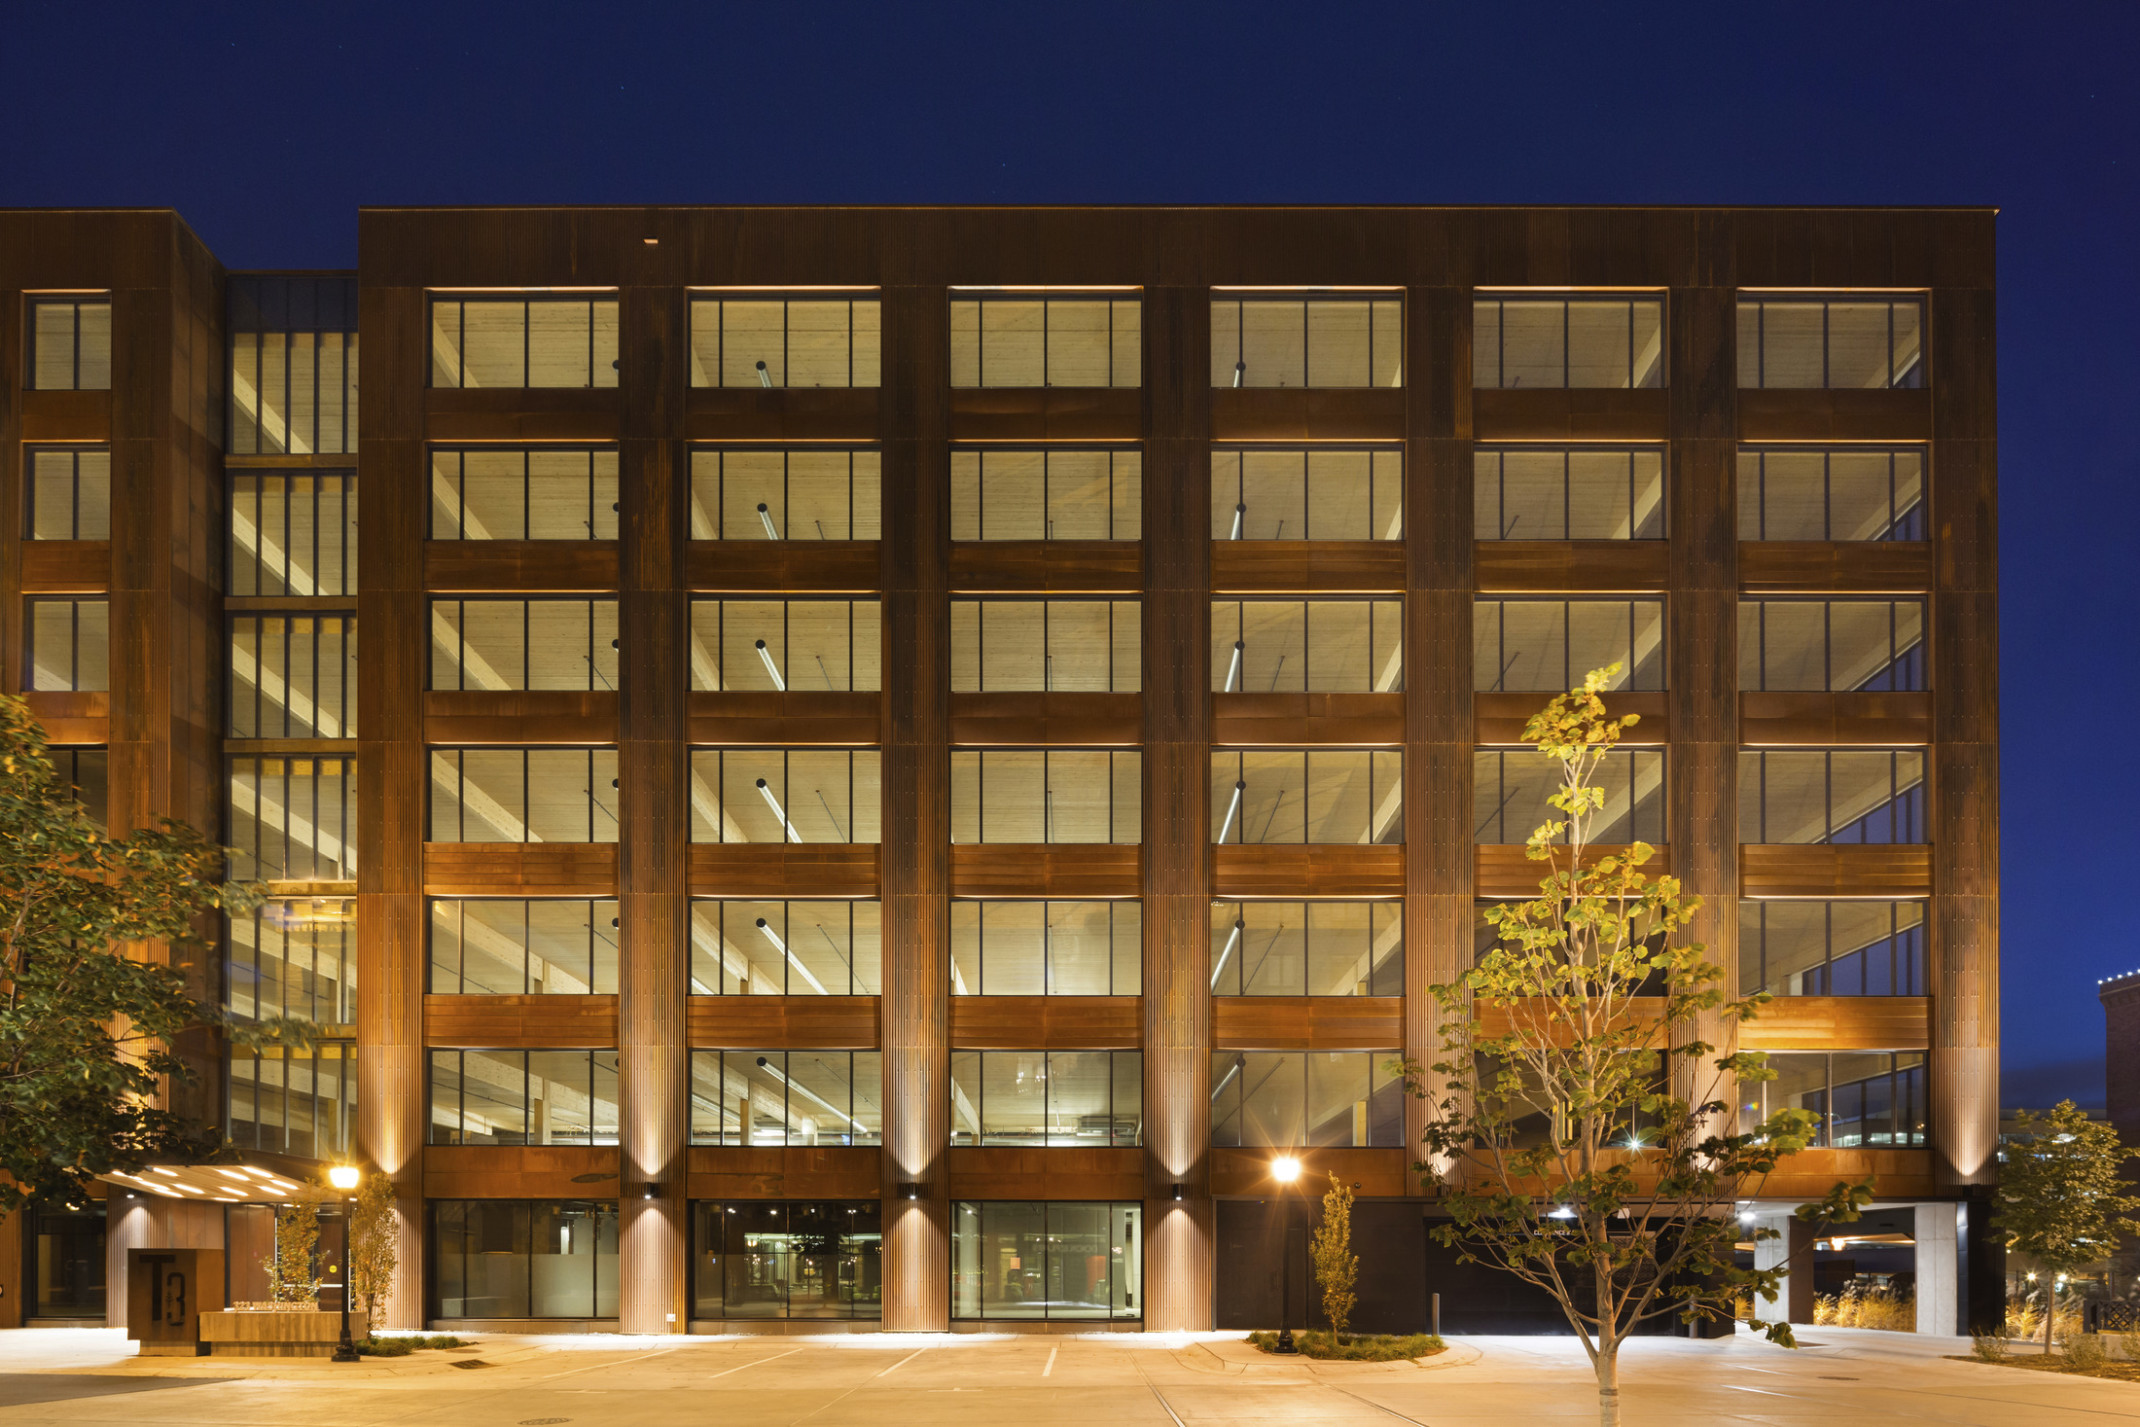 Hines T3 Partnership building in Minneapolis, a mass timber midrise building illuminated at night